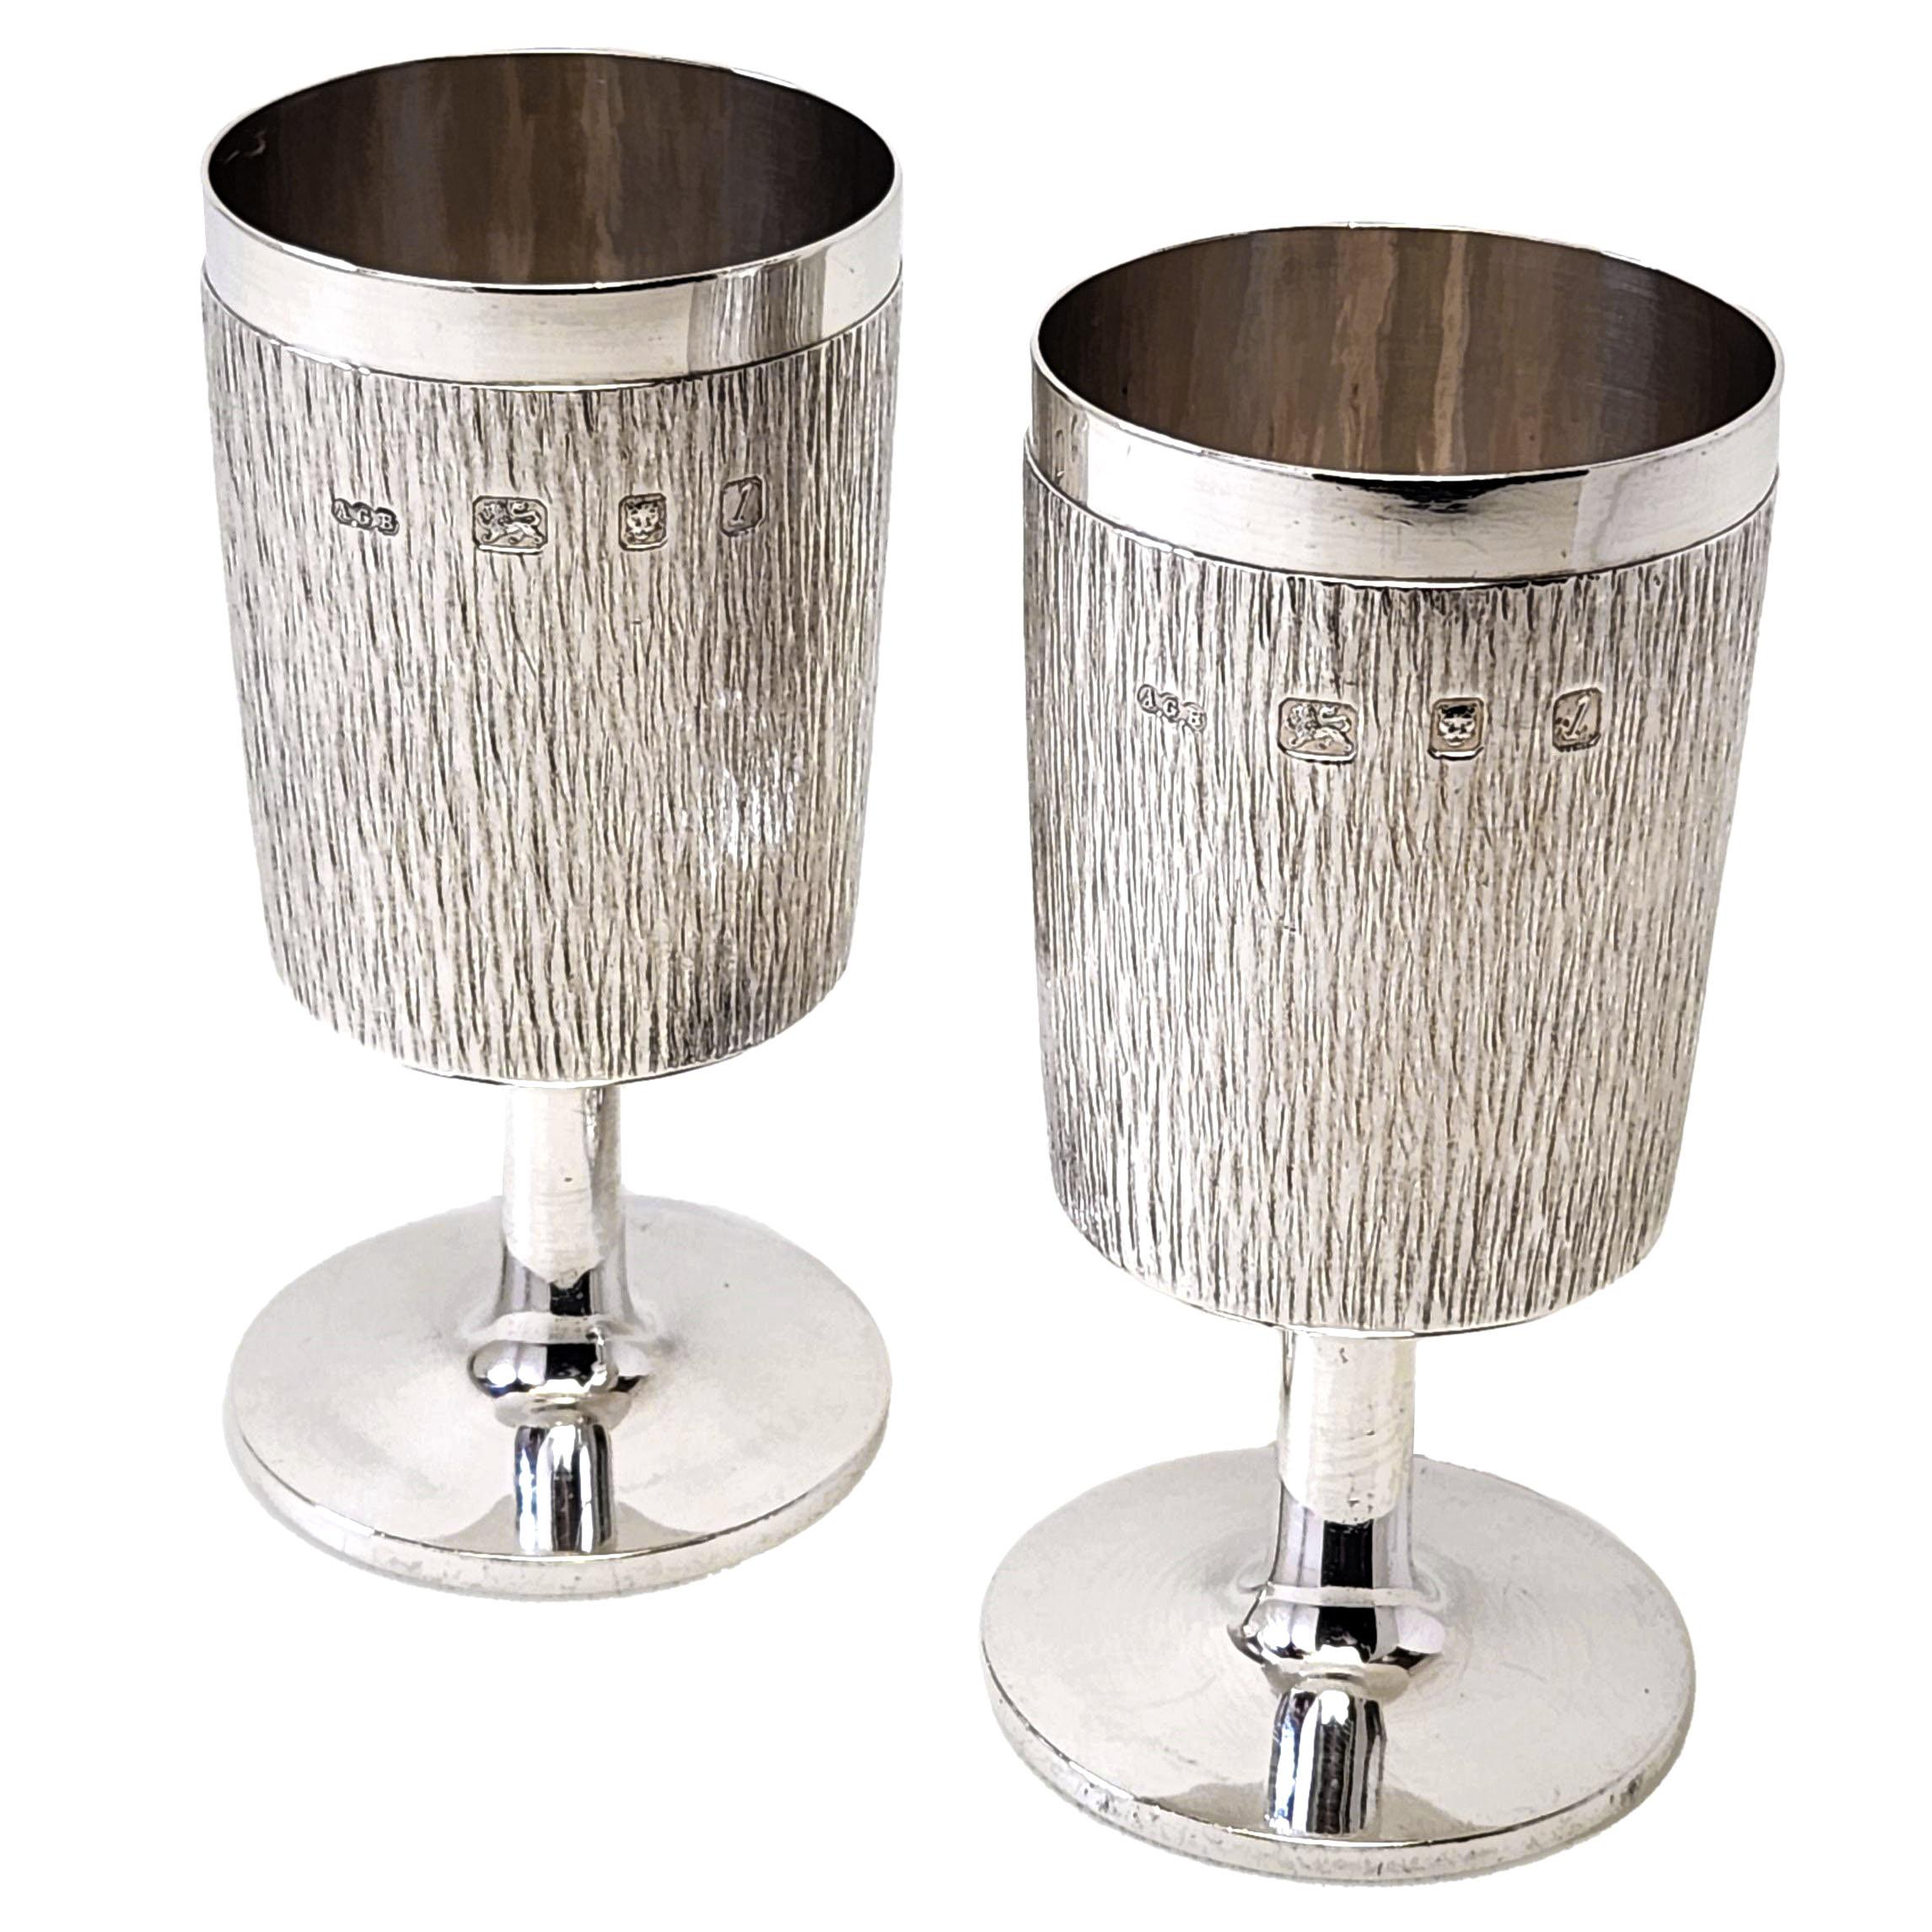 A pair of vintage Solid Silver Goblets embellished with the iconic Bark Patterning that exemplifies Benney's work. The Goblets have a straight sided form and a highly polished spread foot. This pair of Goblets is presented in a fitted blue box with